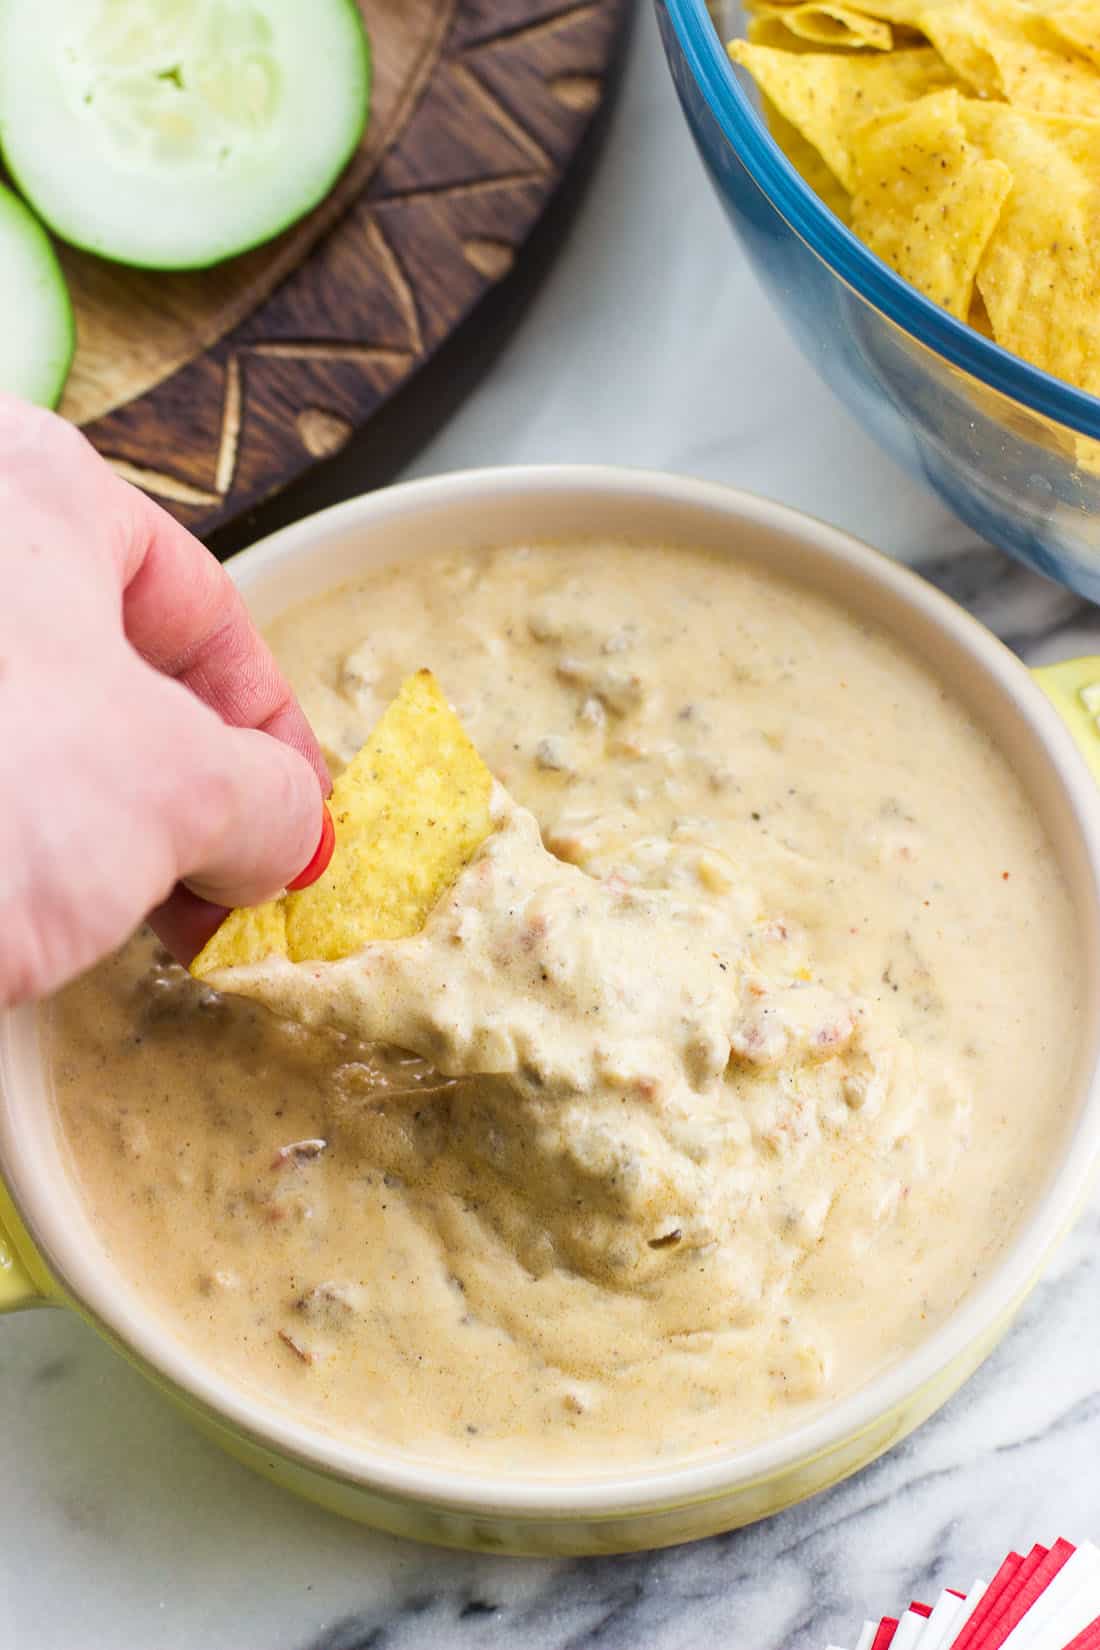 A hand dipping a tortilla chip into a bowl of beef queso dip.